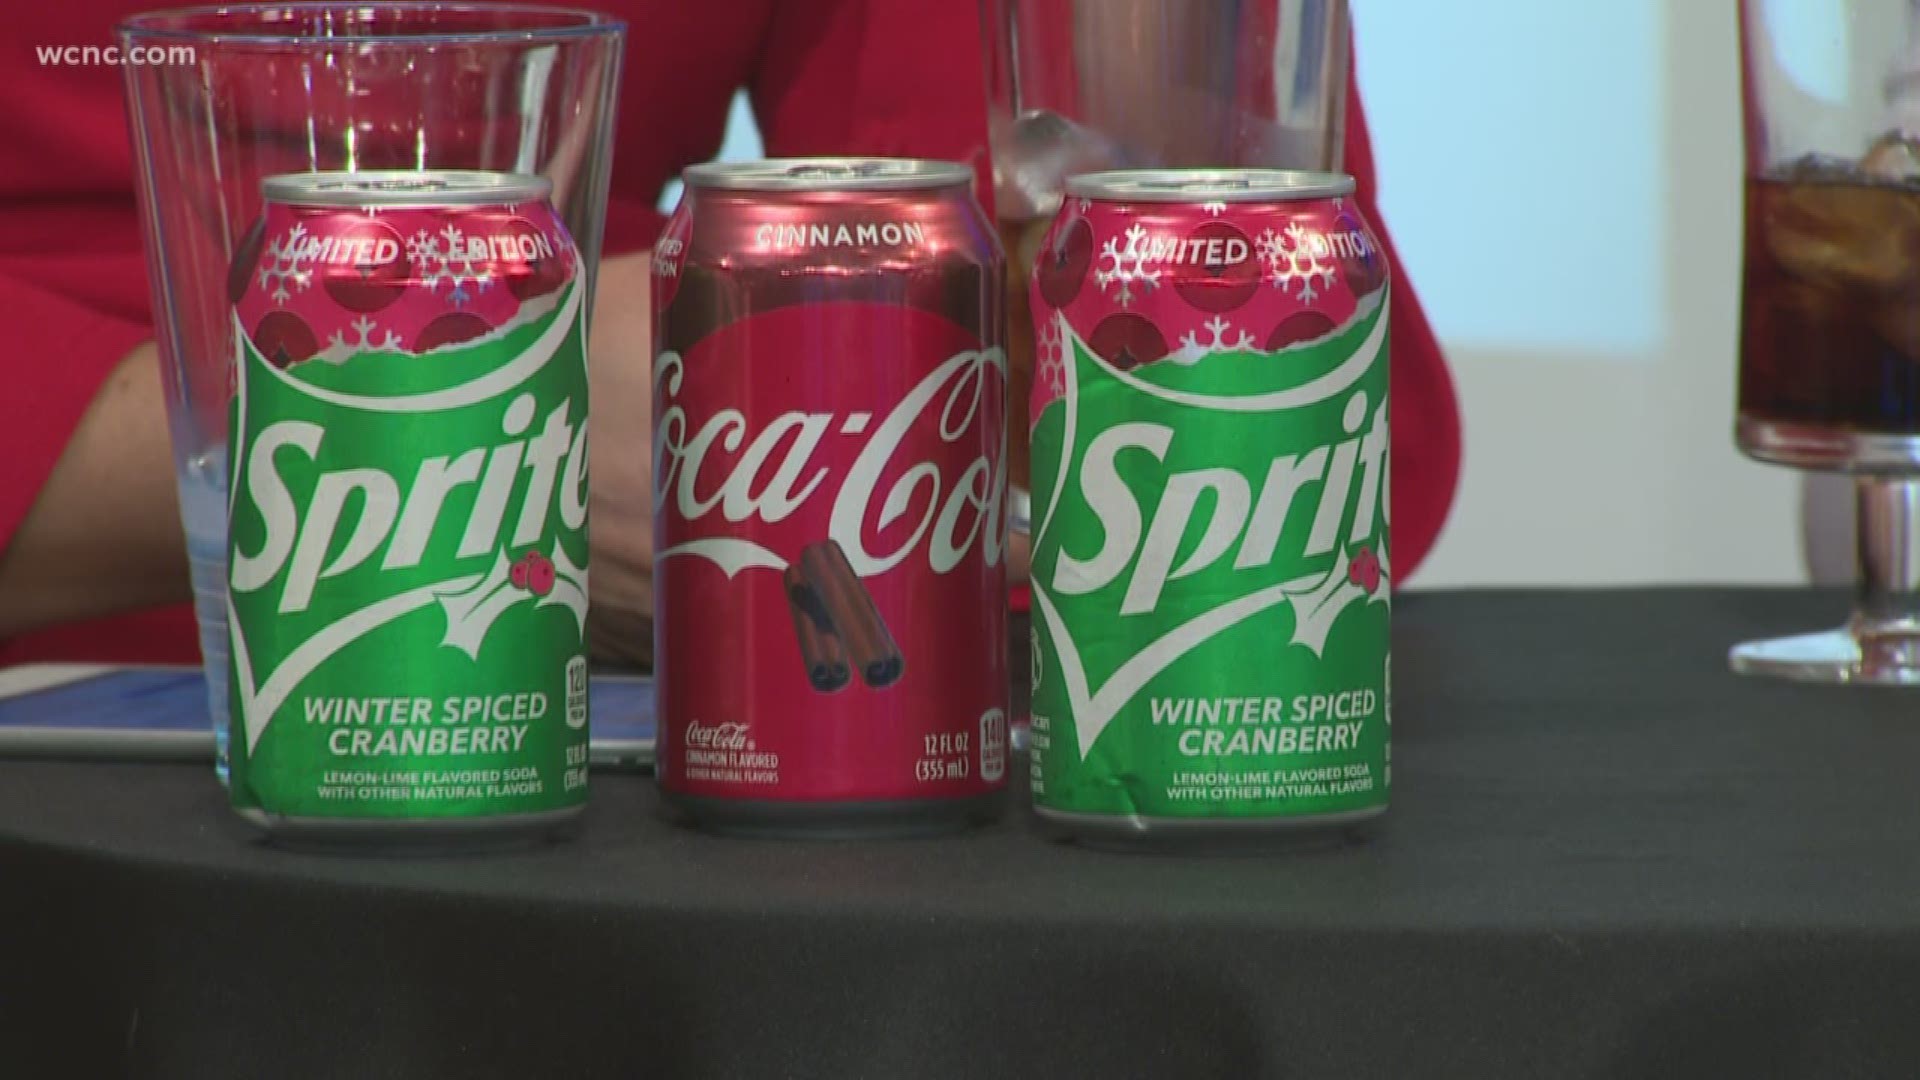 Coca-Cola has released two holiday flavors: Coca-Cola Cinnamon and Sprite Winter Spiced Cranberry.